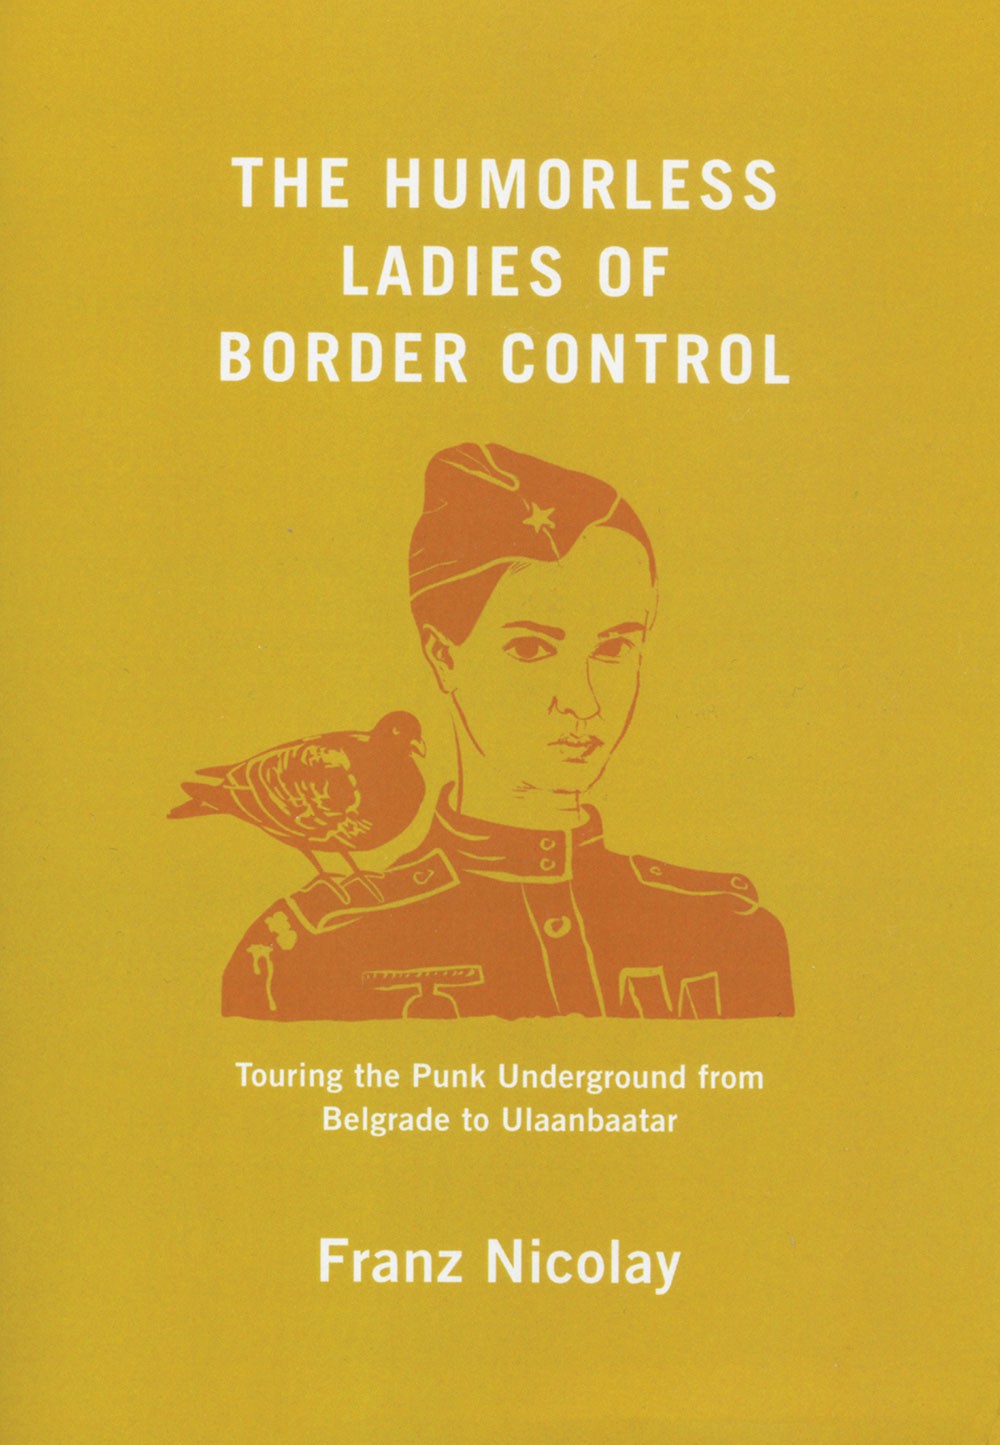 Book Review: The Humorless Ladies of Border Control